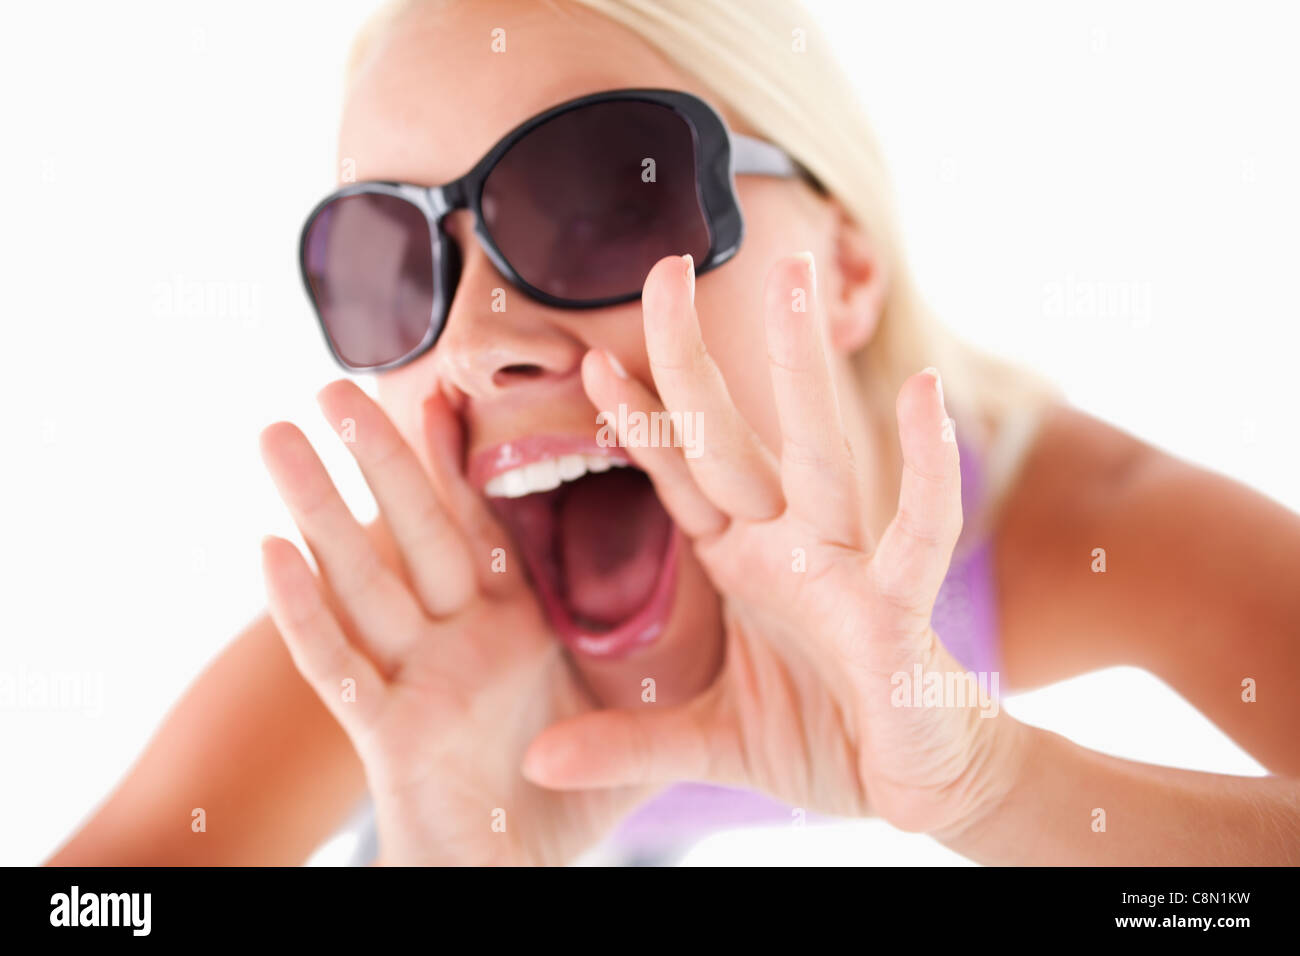 Charming woman with sunglasses in high spirits Stock Photo